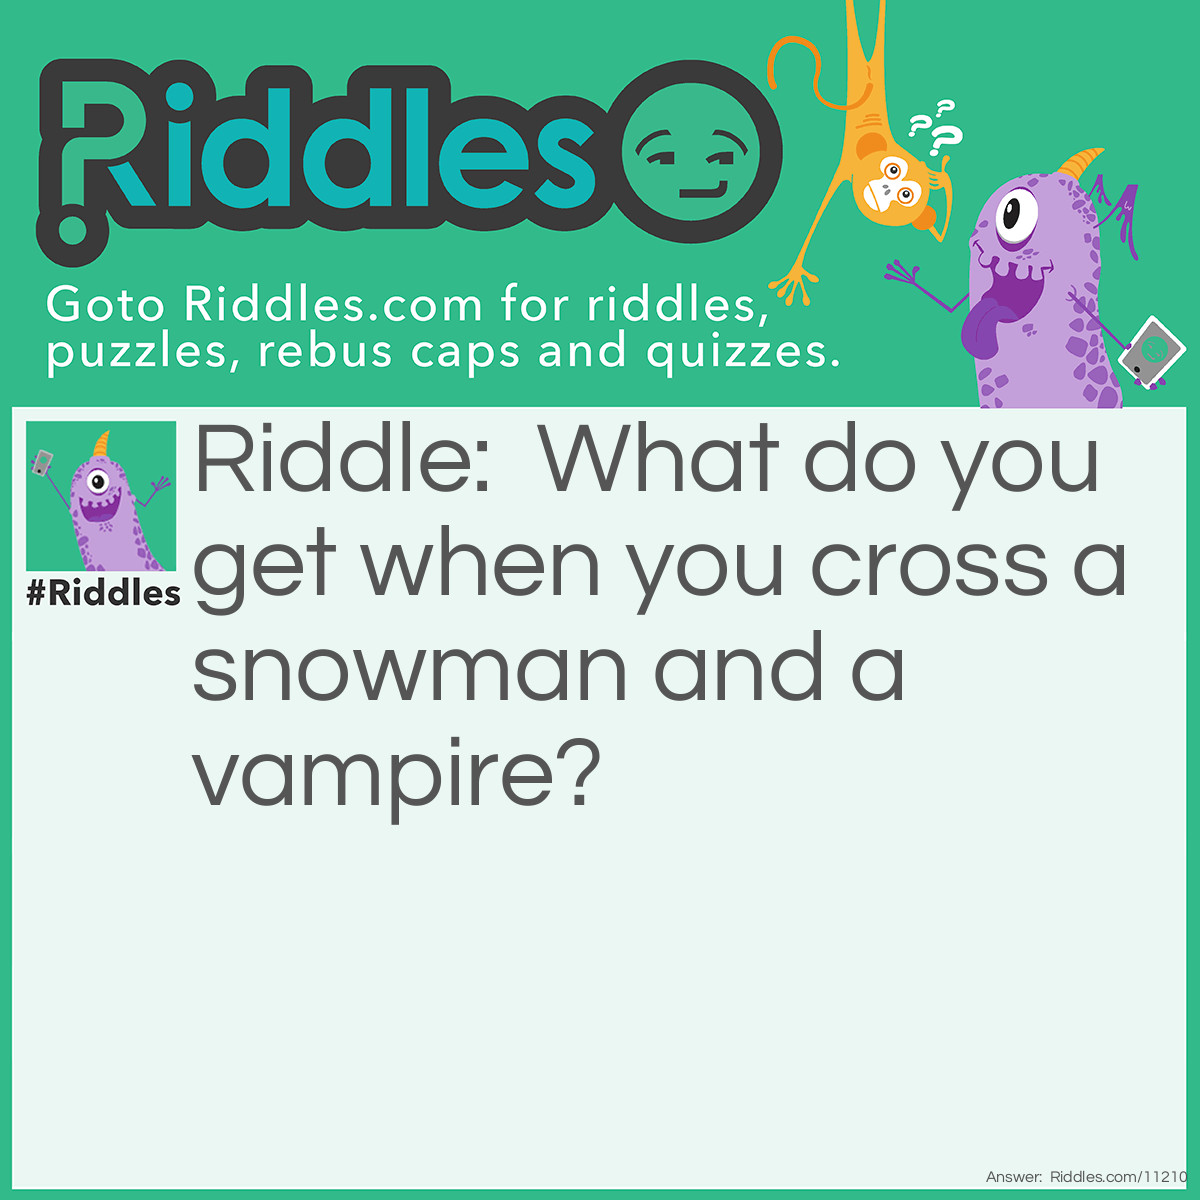 Riddle: What do you get when you cross a snowman and a vampire? Answer: Frostbite!